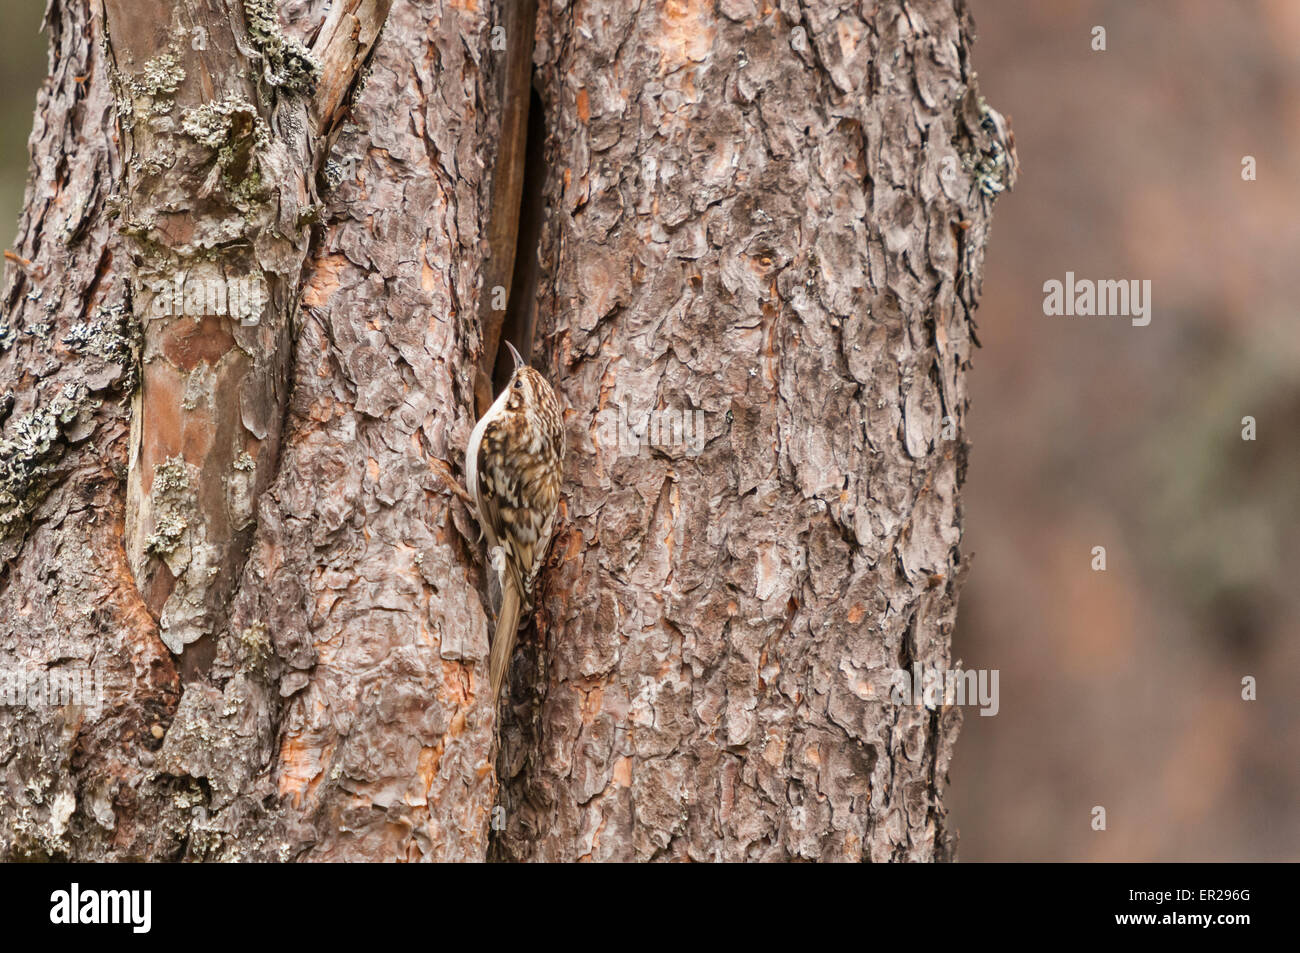 A common or Eurasian Tree Creeper, Certhia familiaris, entering it's nest in a gap in a pine tree bark. Stock Photo